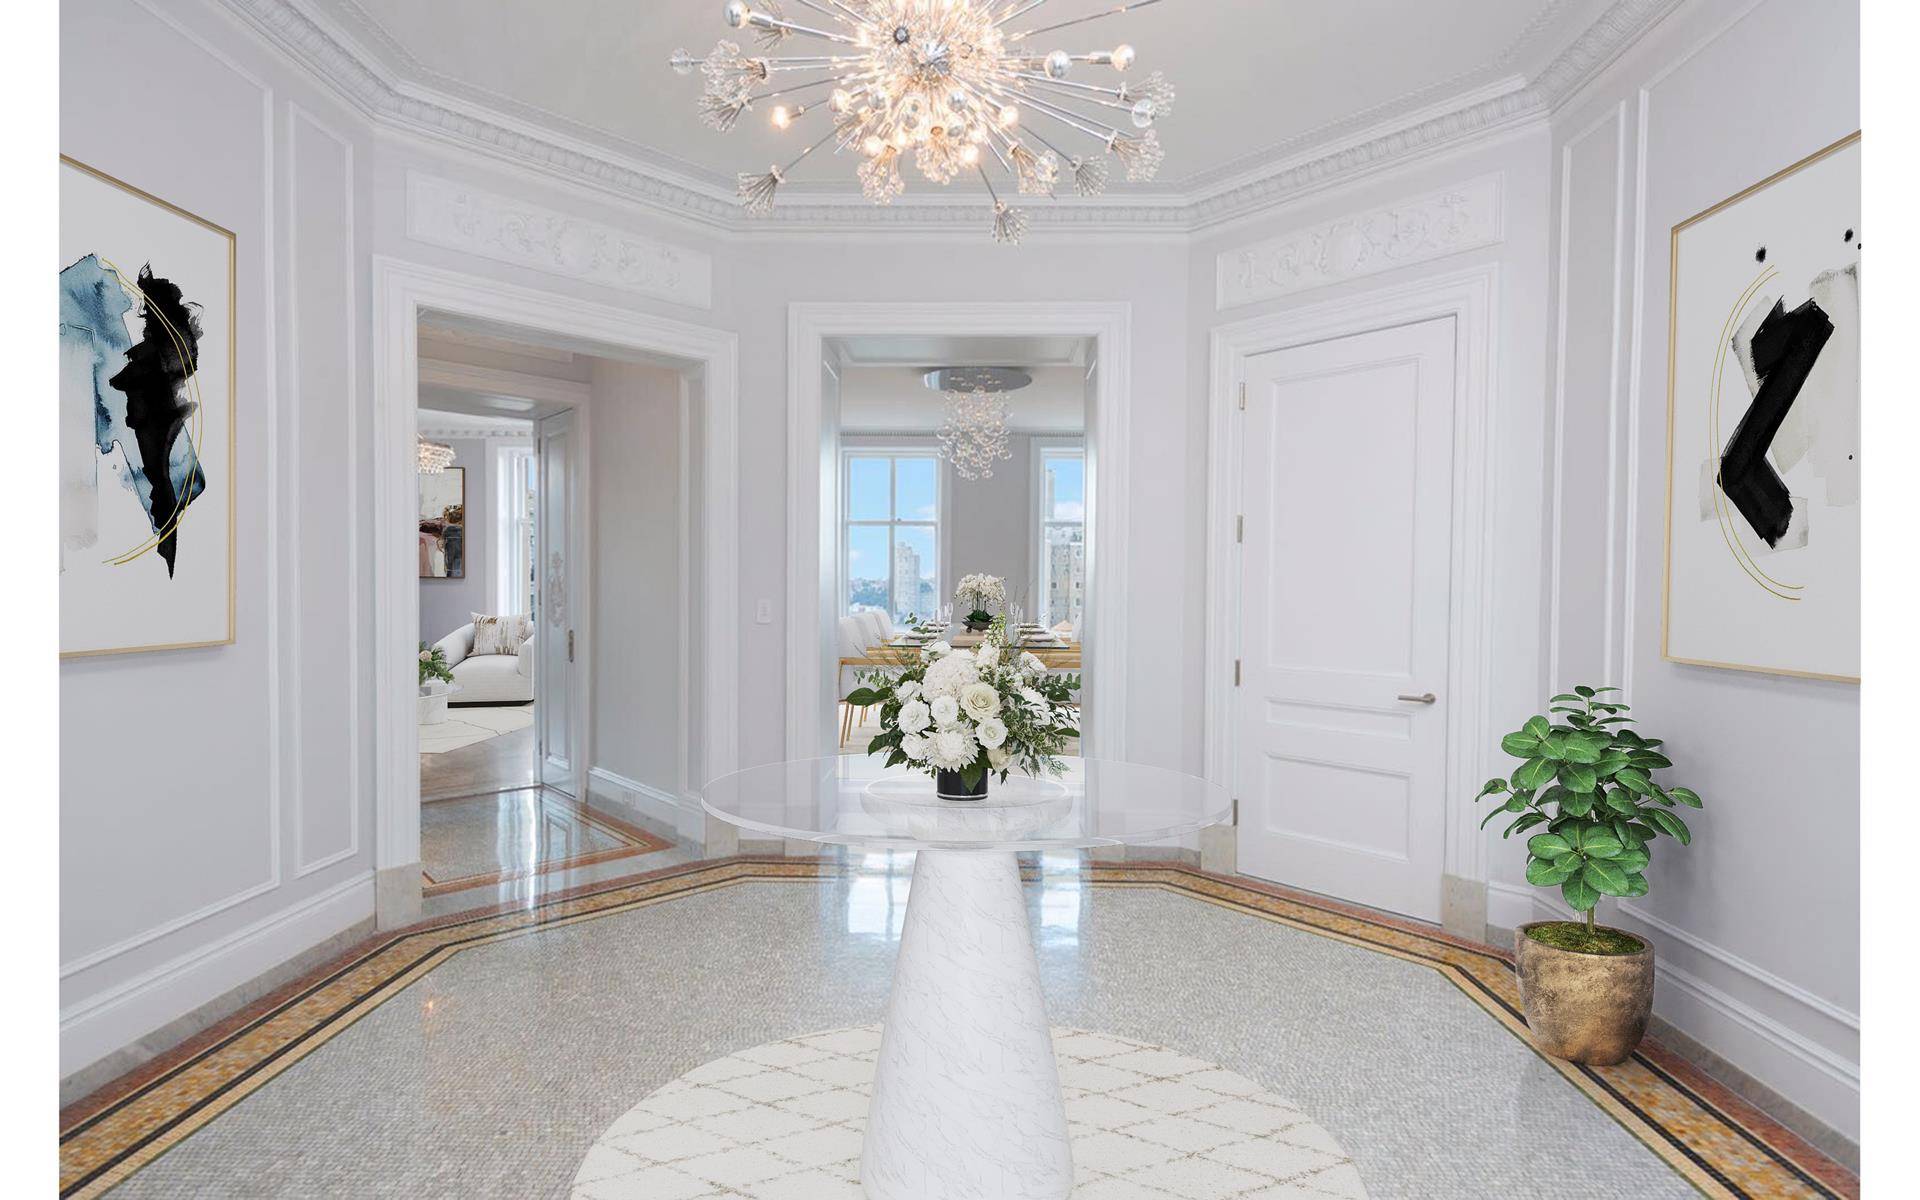 Welcome home to your gut renovated stunning corner three bedroom, three and half bath residence at the famed Apthorp Condominium.